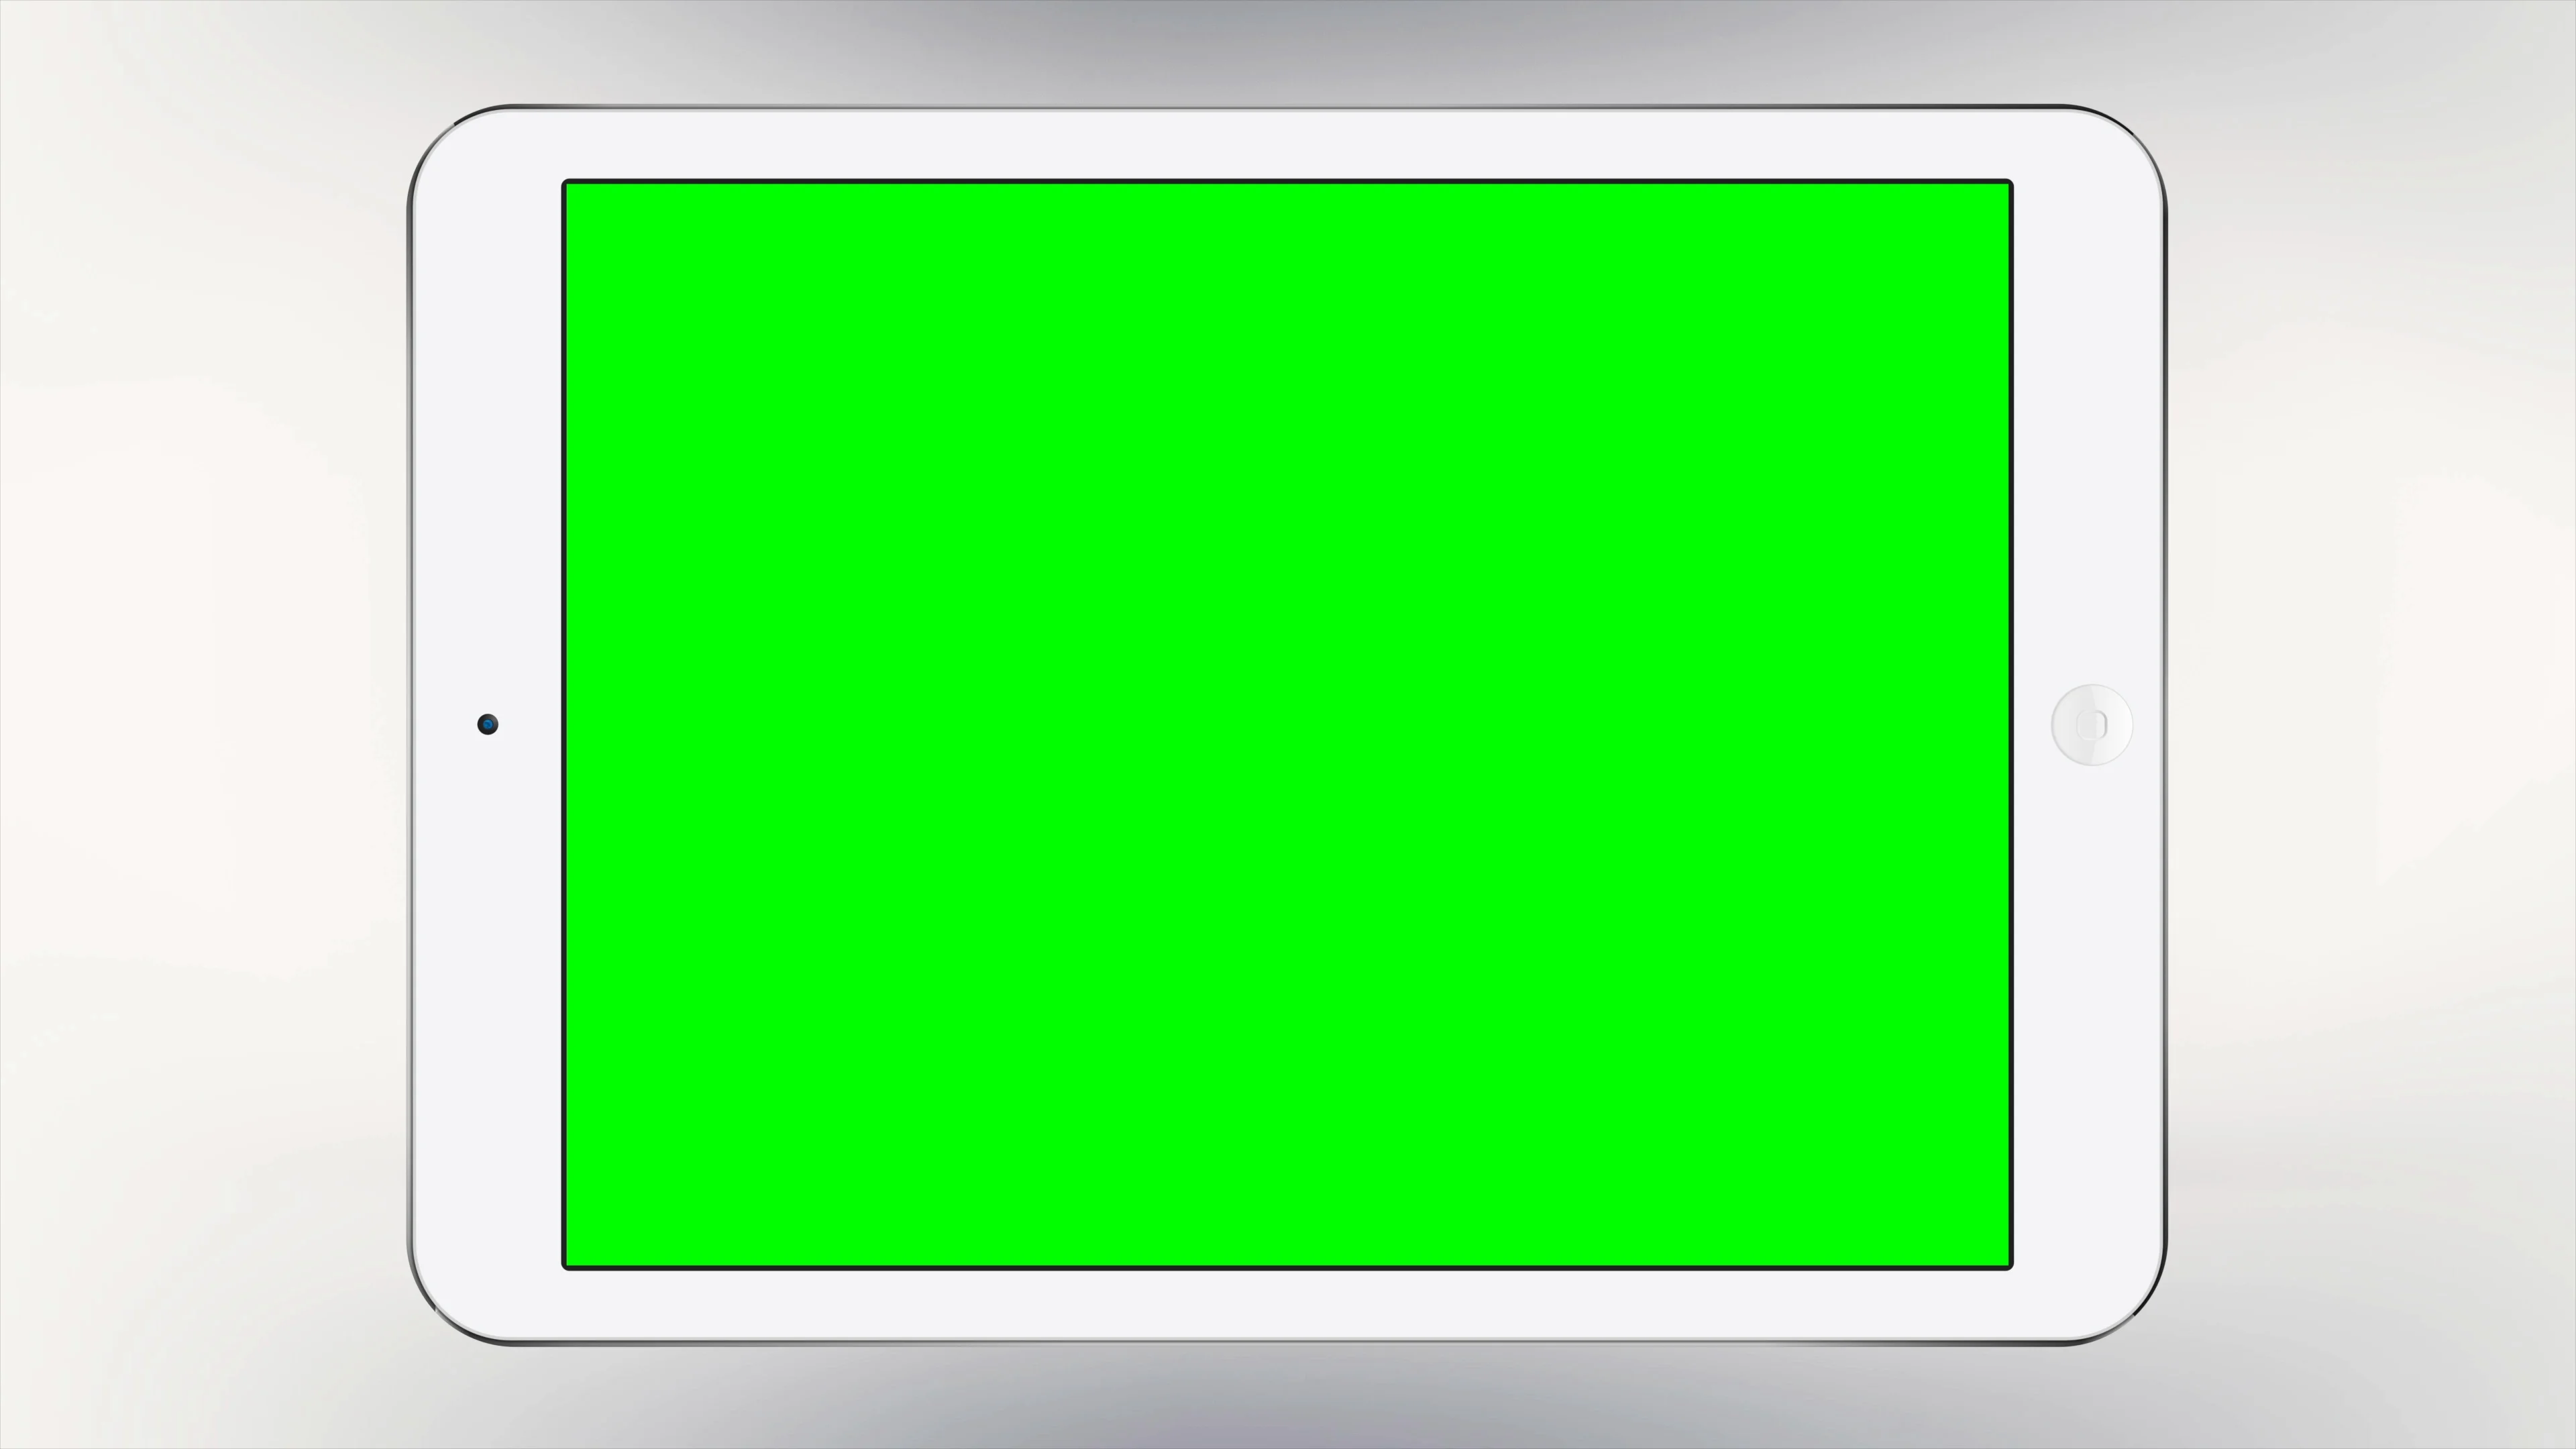 green screen apps for ipad